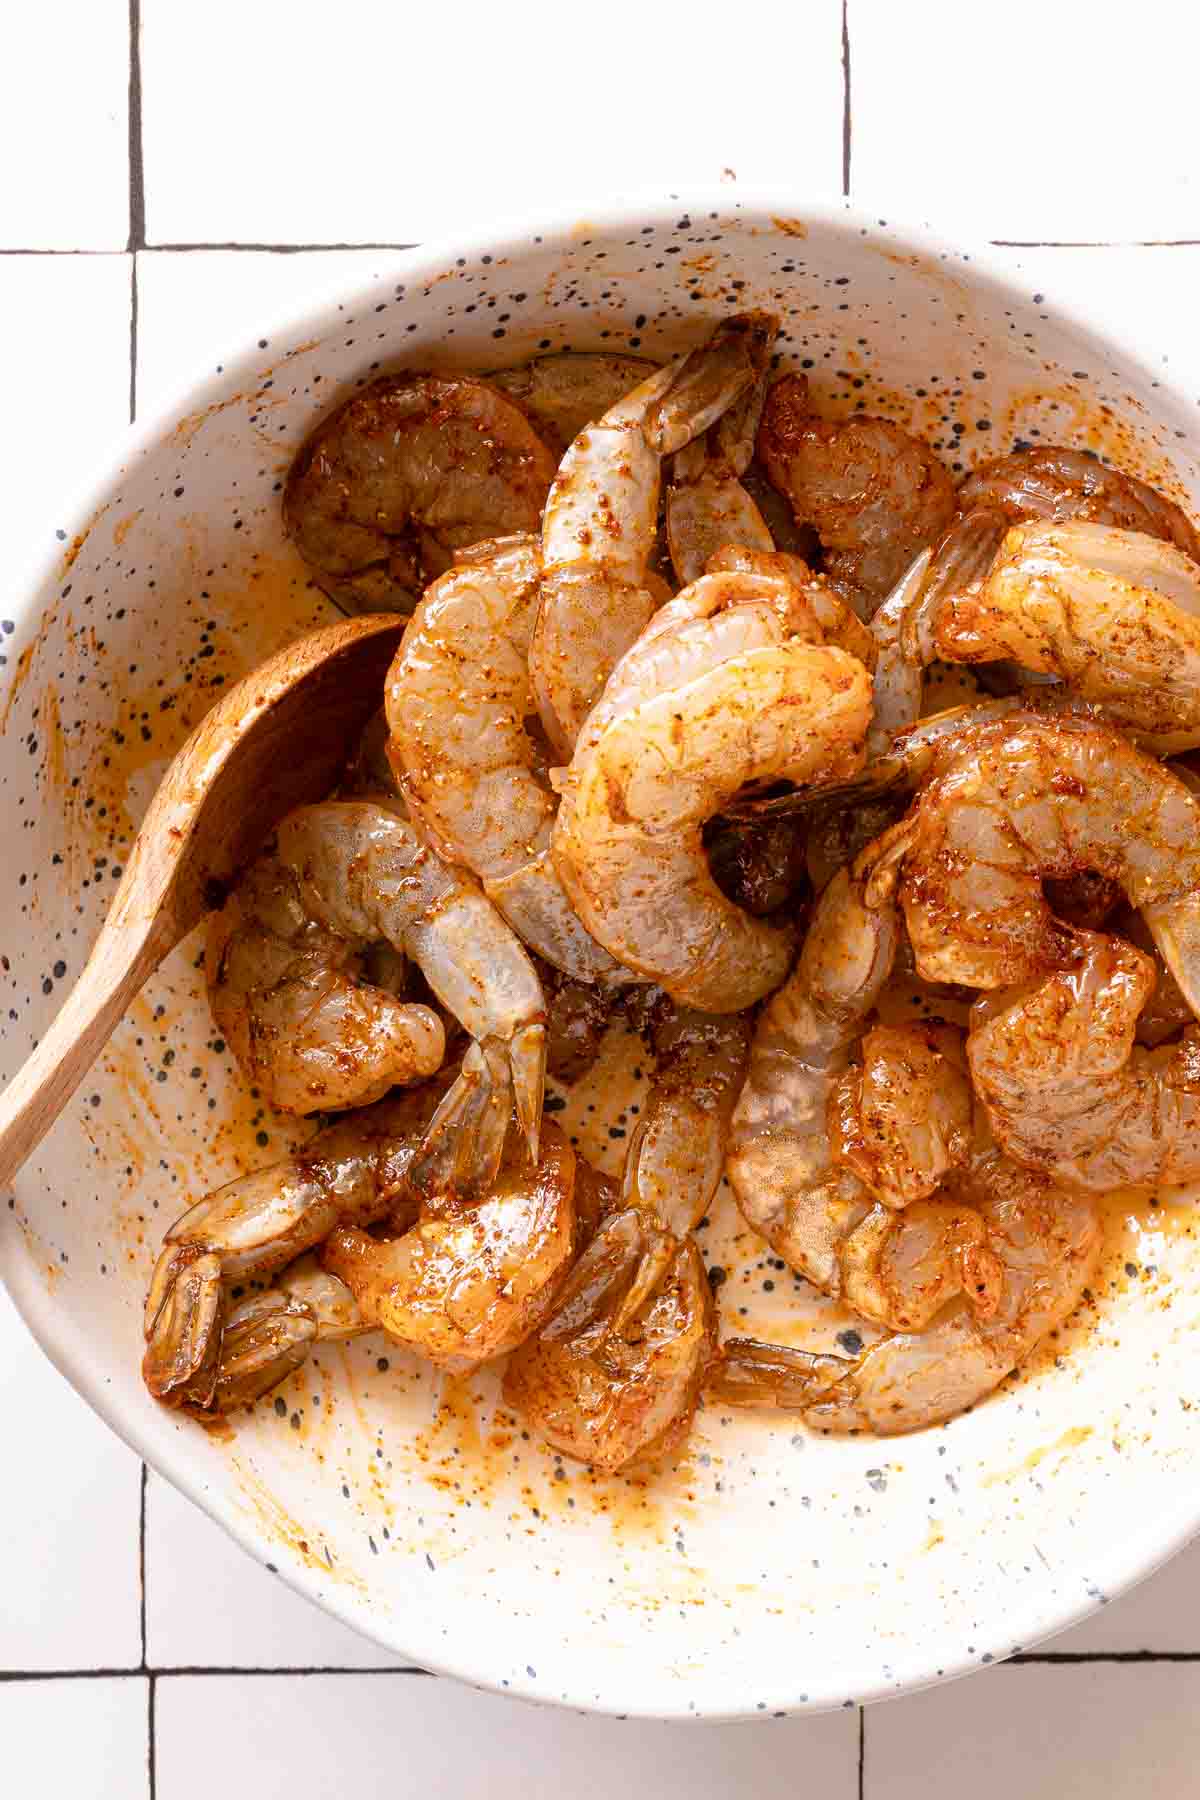 seasoned raw shrimp in bowl with wooden spoon.